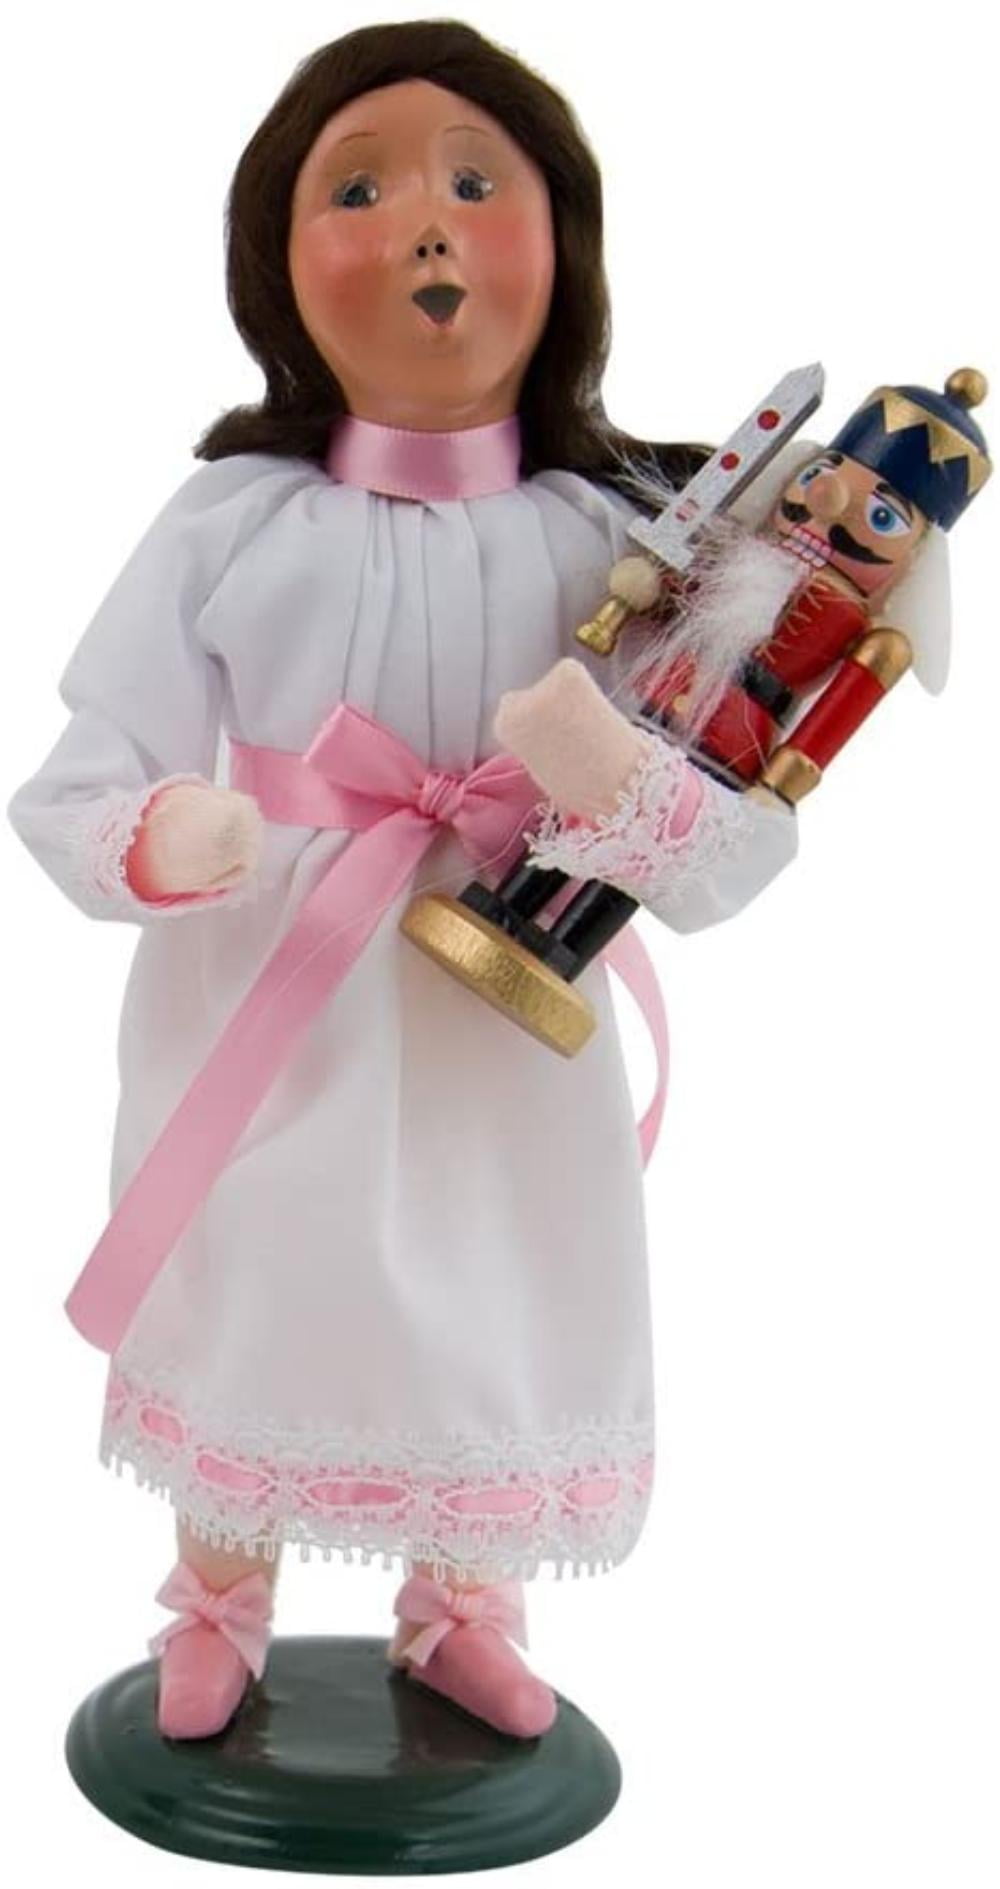 Byers' Choice Drosselmeyer Caroler Figurine 2154 from The Nutcracker Ballet Collection Collection